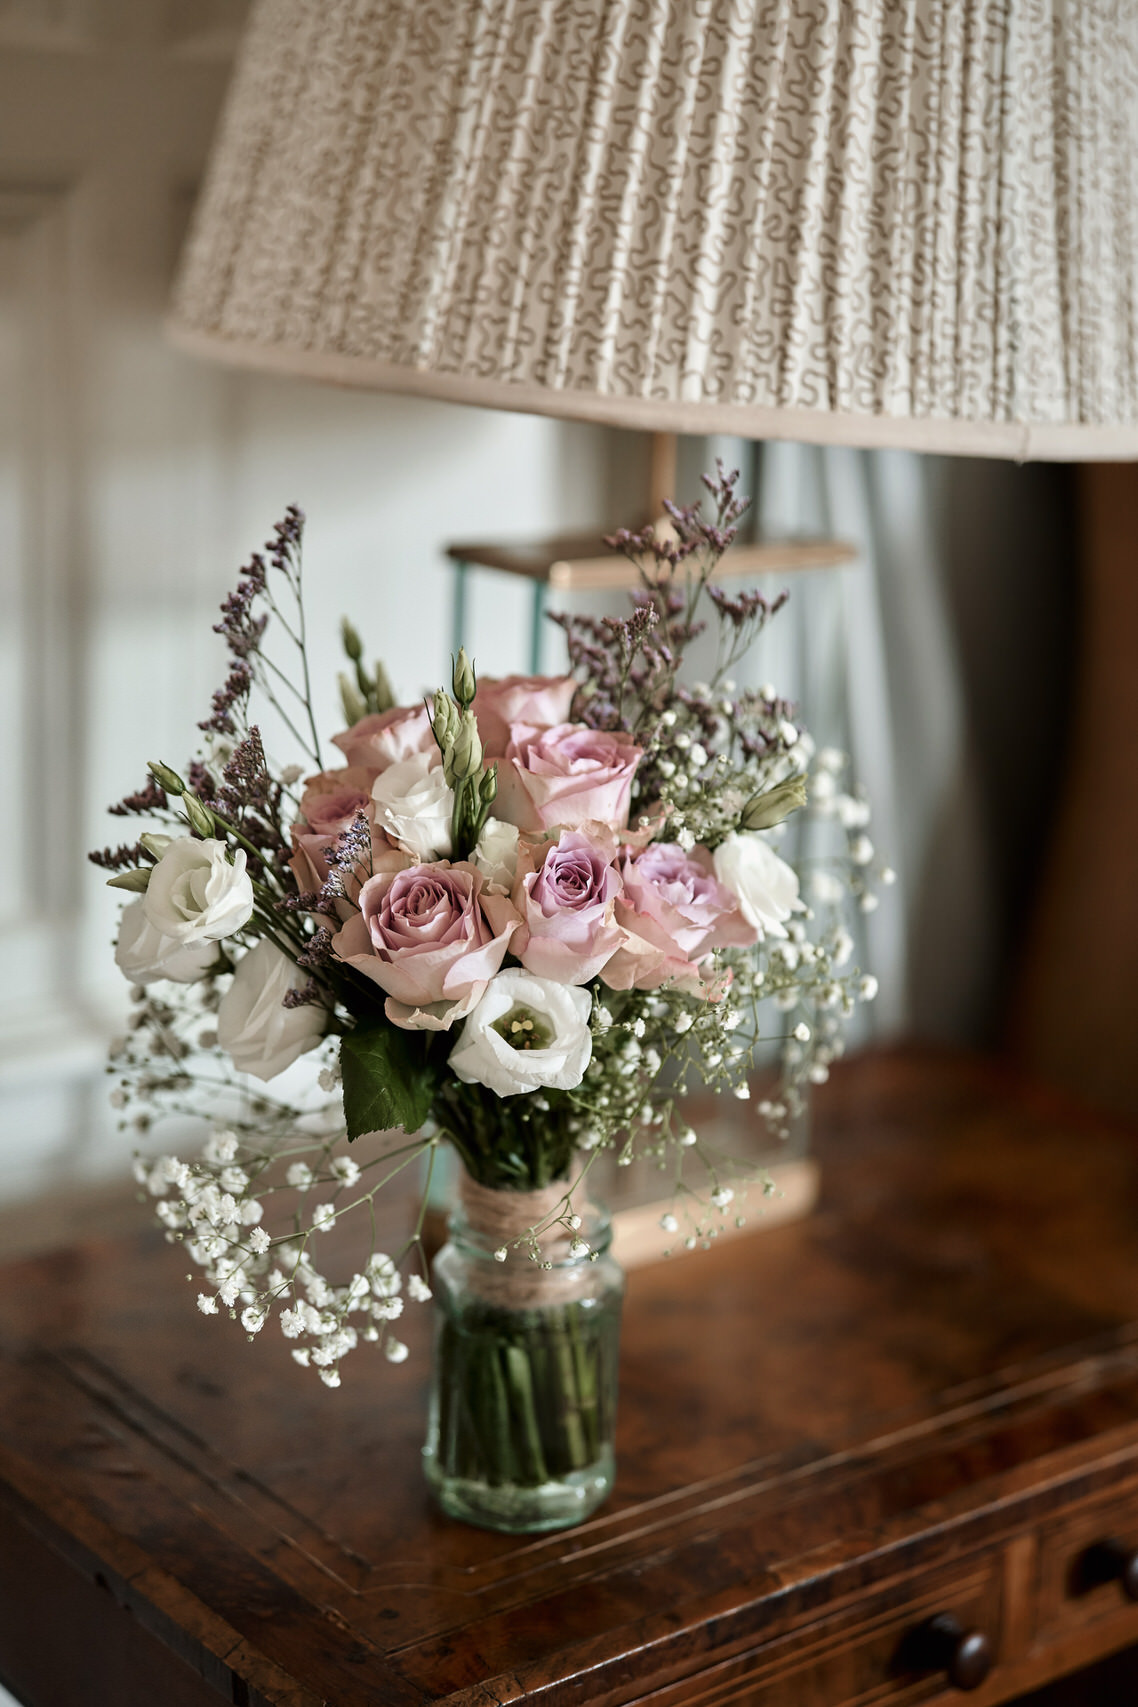 There's a vase with pink and white flowers next to a lamp on a table.